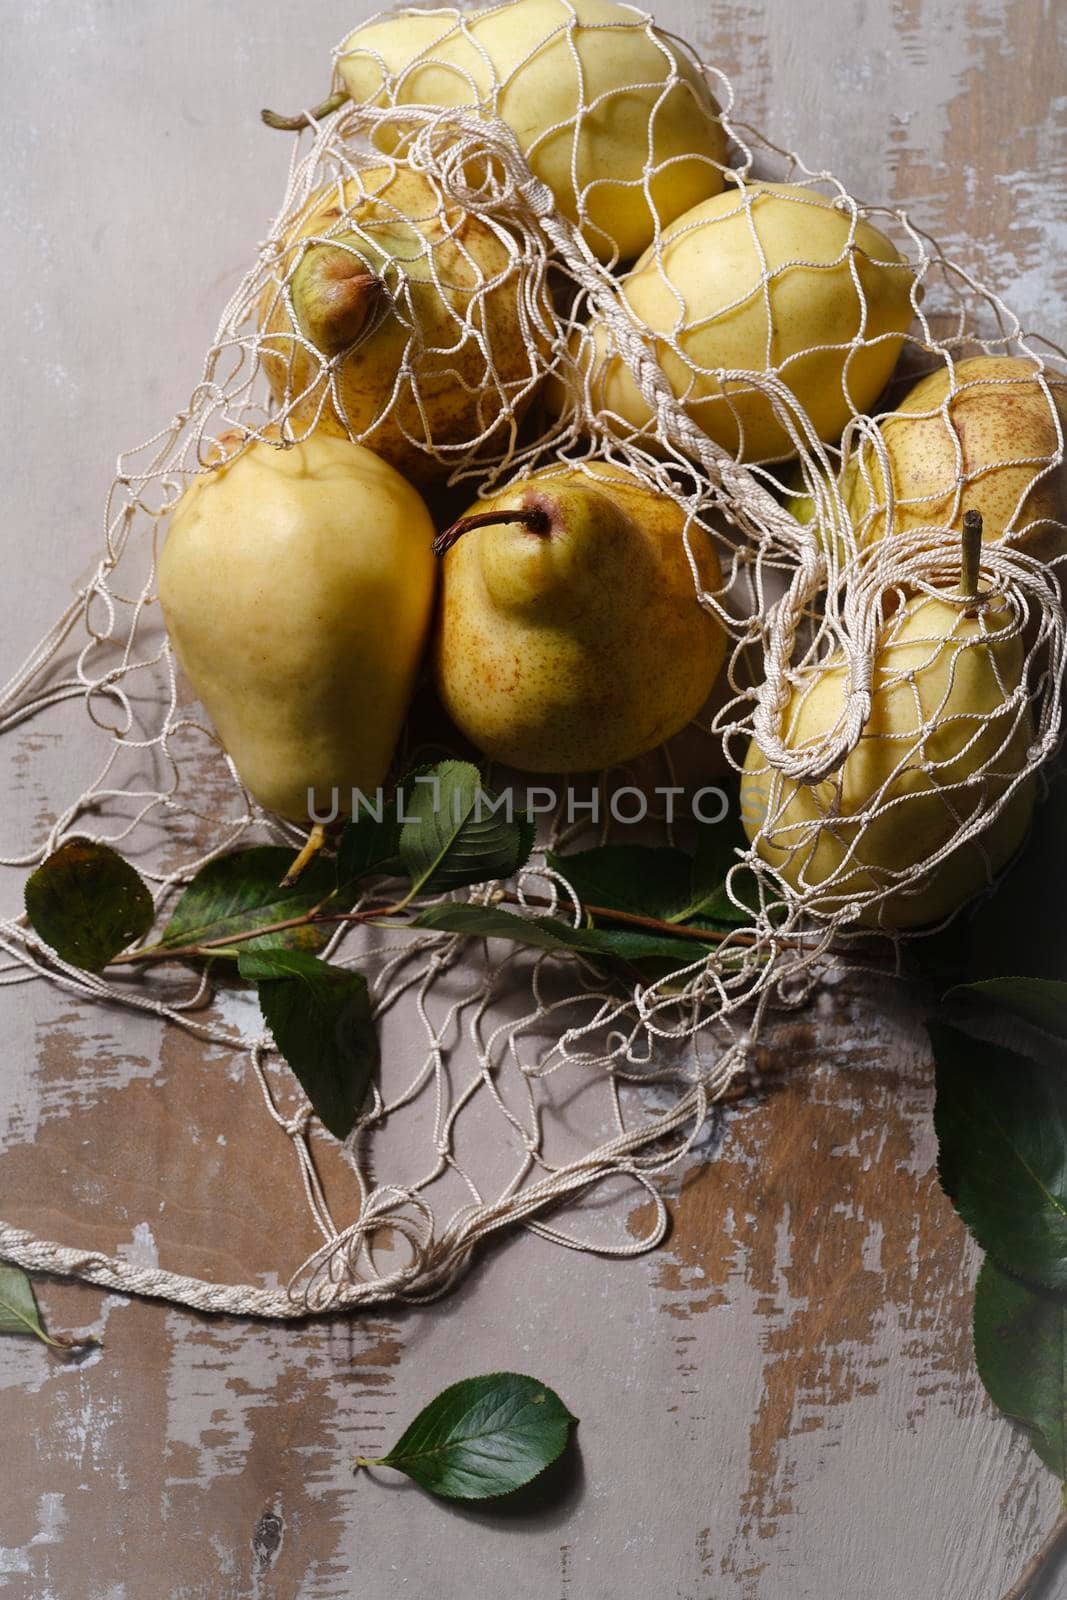 A group of fresh ripe yellow pears in string bag on wooden table, fruits harvesting concept, top view. by Vera_FoodandGarden